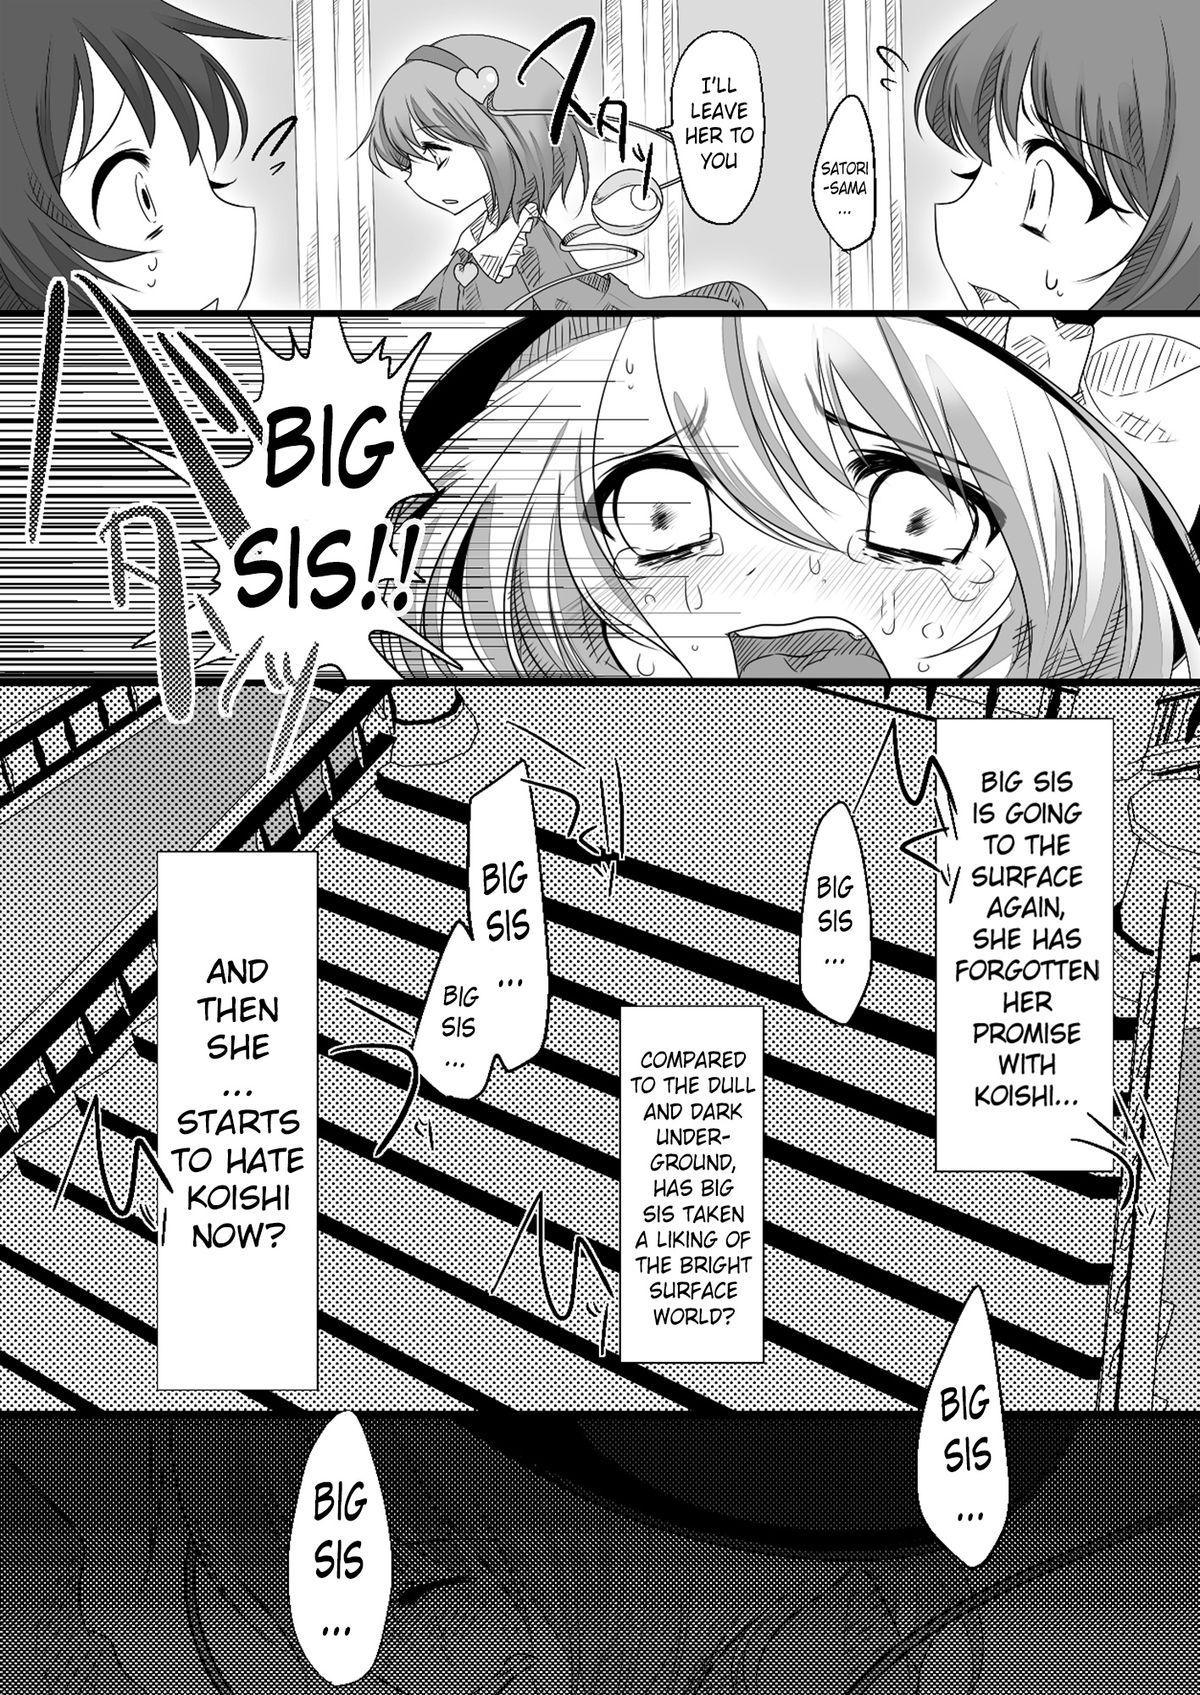 Polla The greatest hate springs from the greatest love - Touhou project Amateurs Gone Wild - Page 6